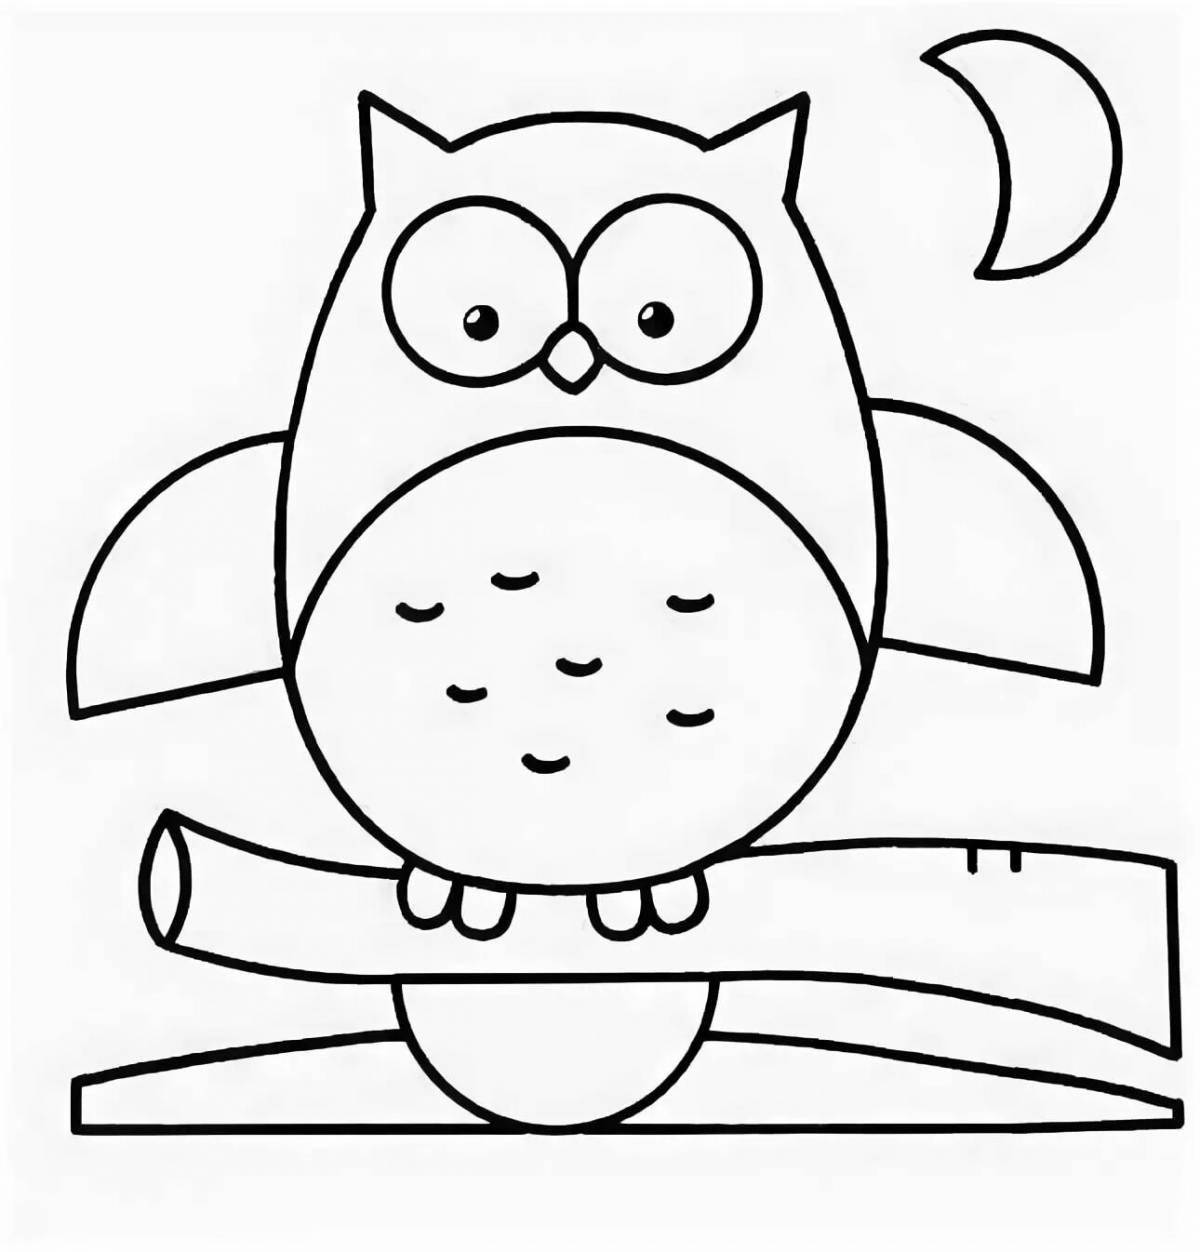 Quirky squick coloring page